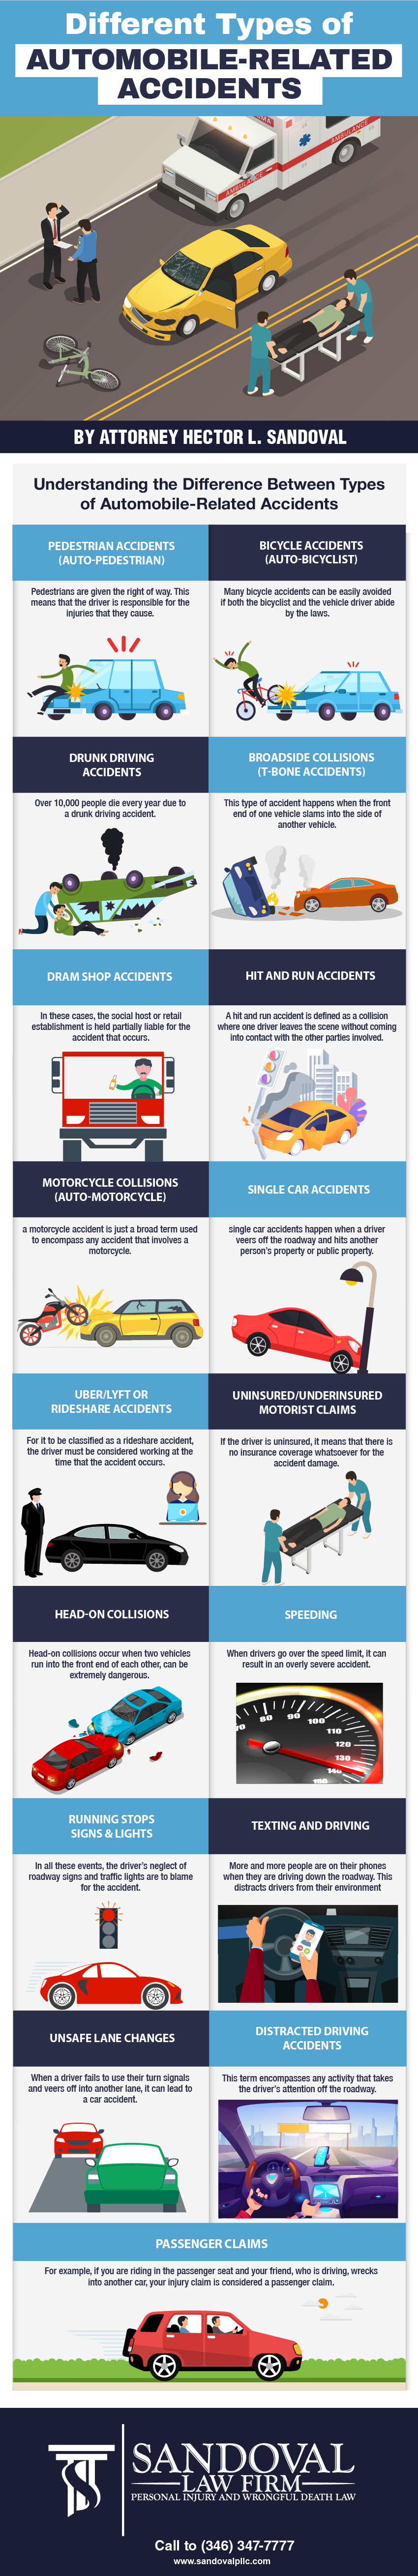 Types of automobile related accidents